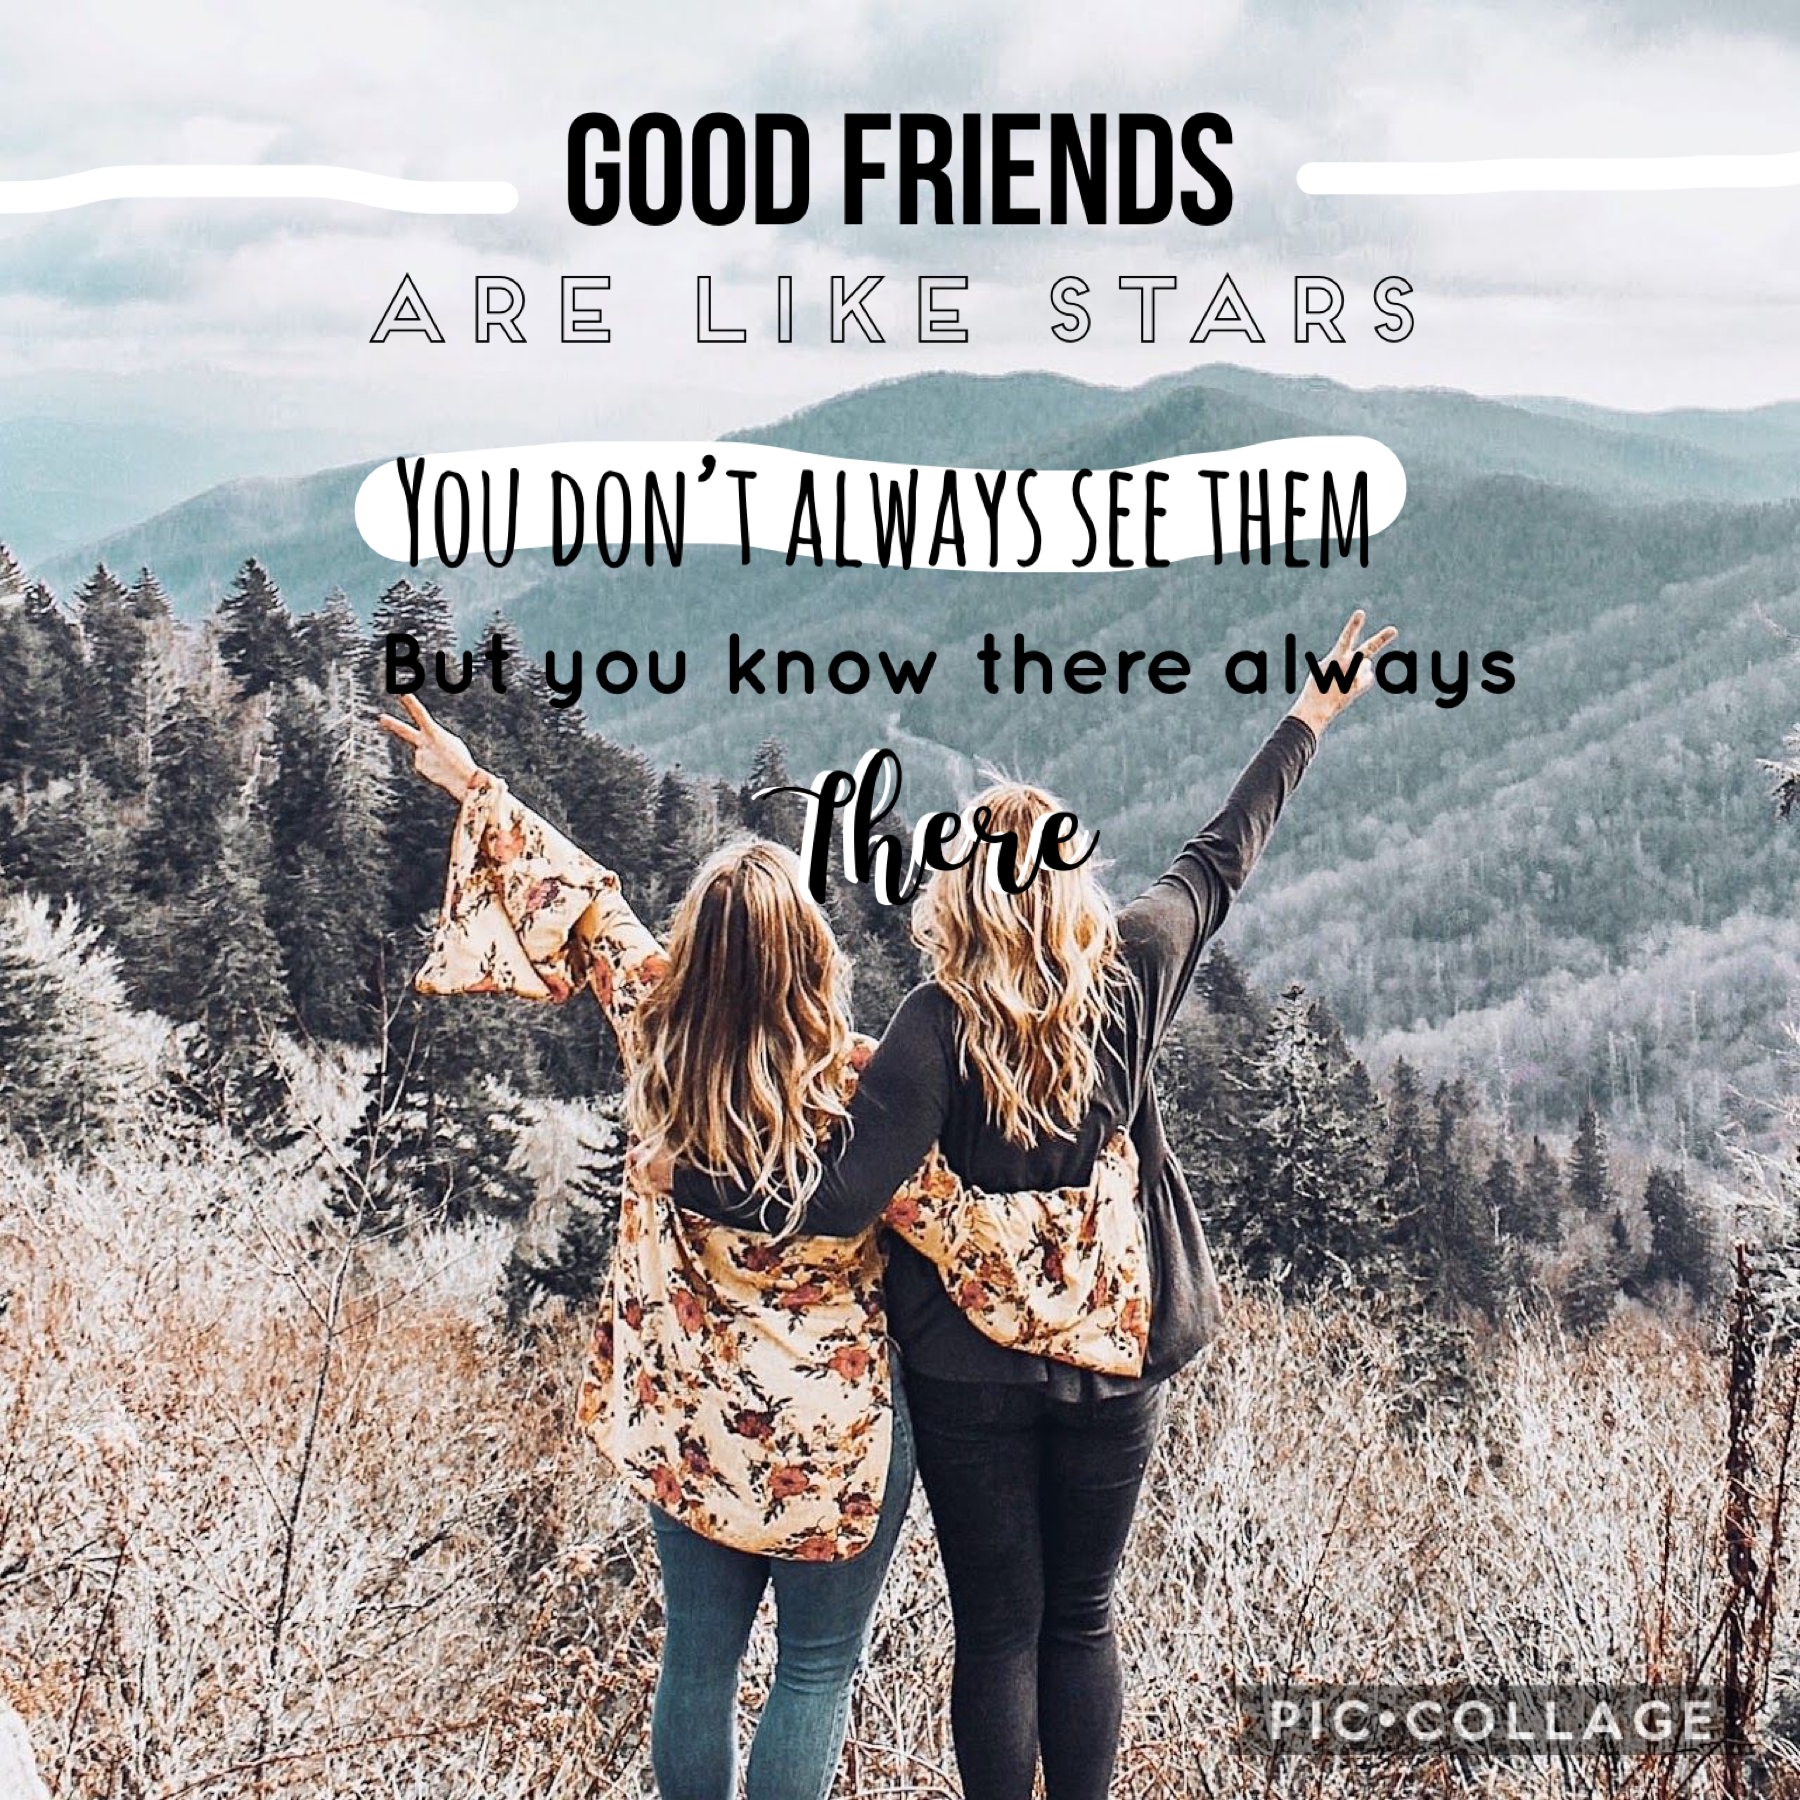 Comment done some quotes that I should do about friends. You might have your quotes featured on my acc